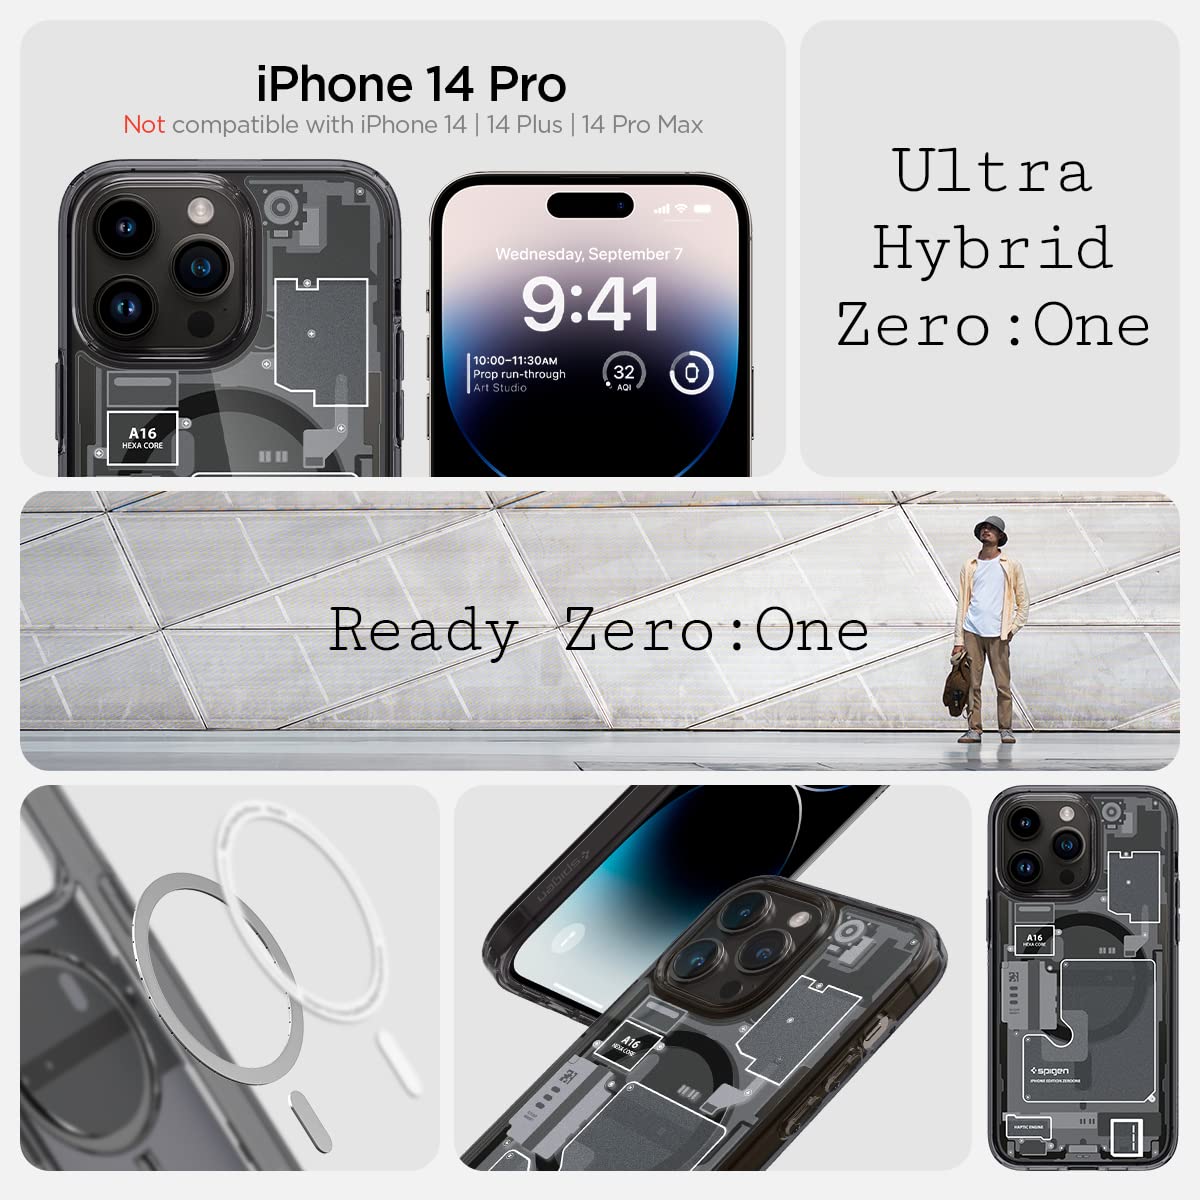 Premium Ultra Hybrid Magfit Cover By iSeriesHub Compatible with MagSafe for iPhone Series